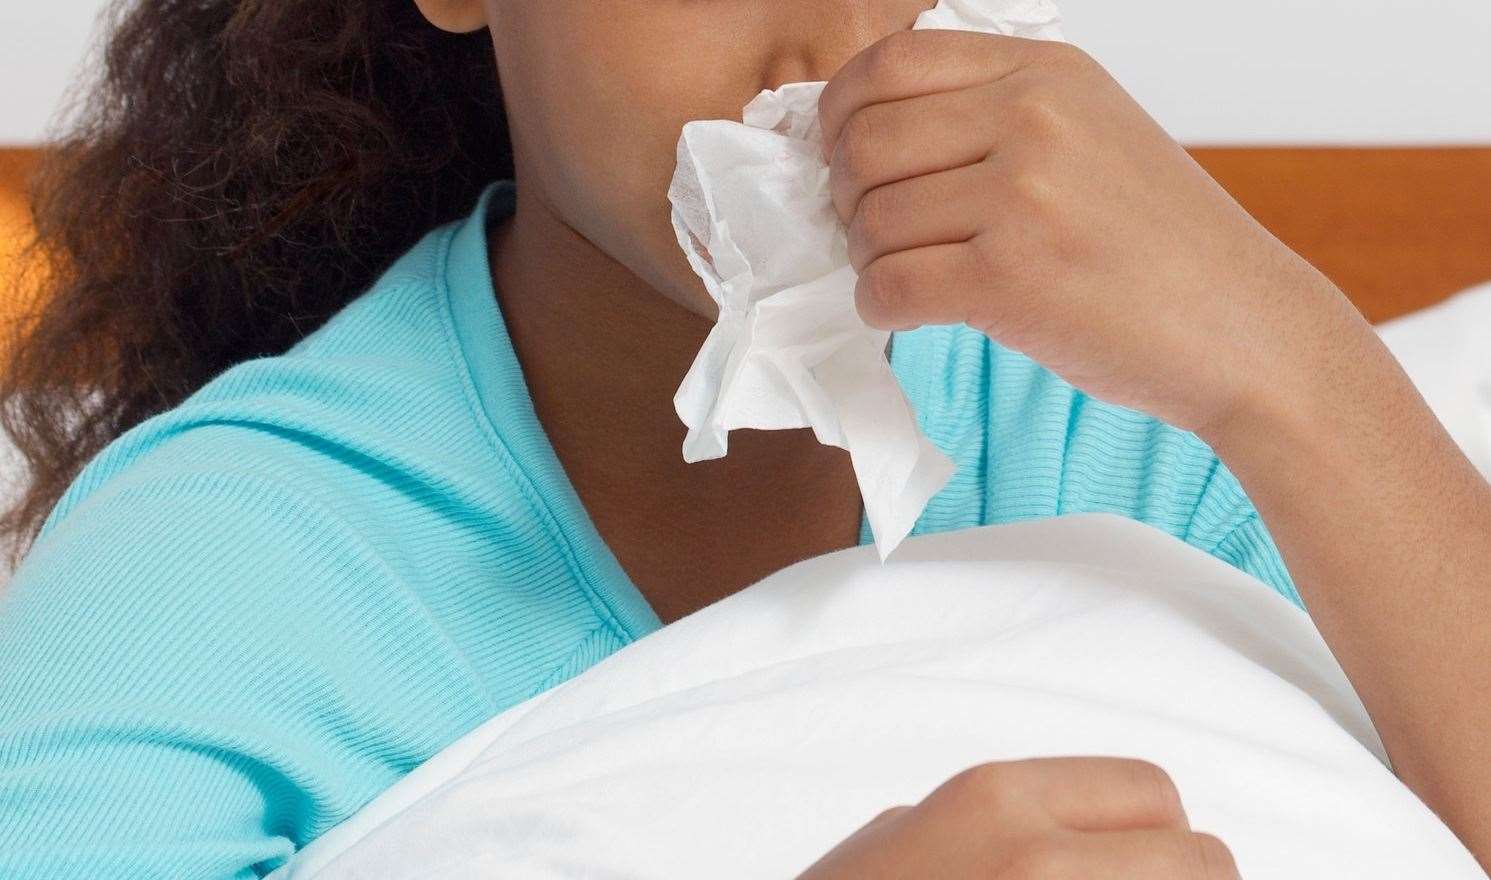 Nausea and muscle aches and pains are among the symptoms making children unwell